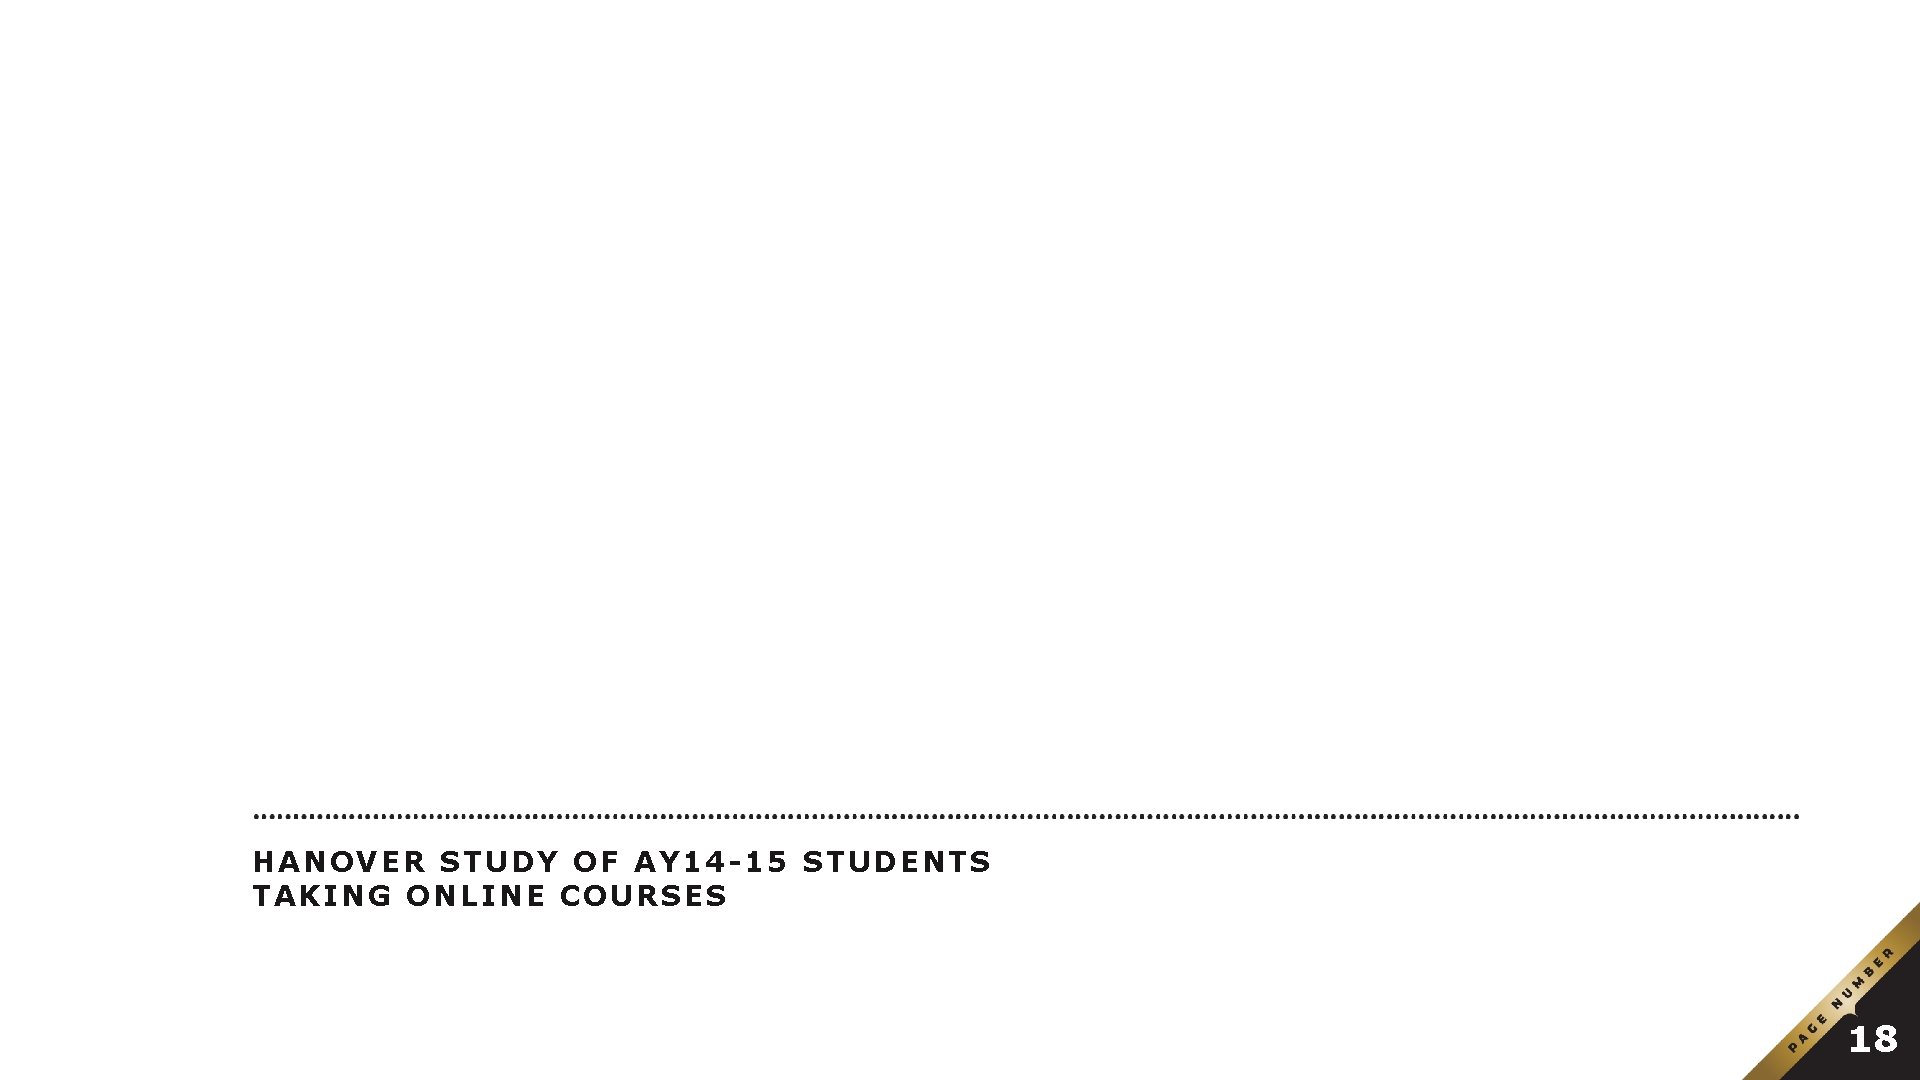 Online Student Satisfaction HANOVER STUDY OF AY 14 -15 STUDENTS TAKING ONLINE COURSES 18